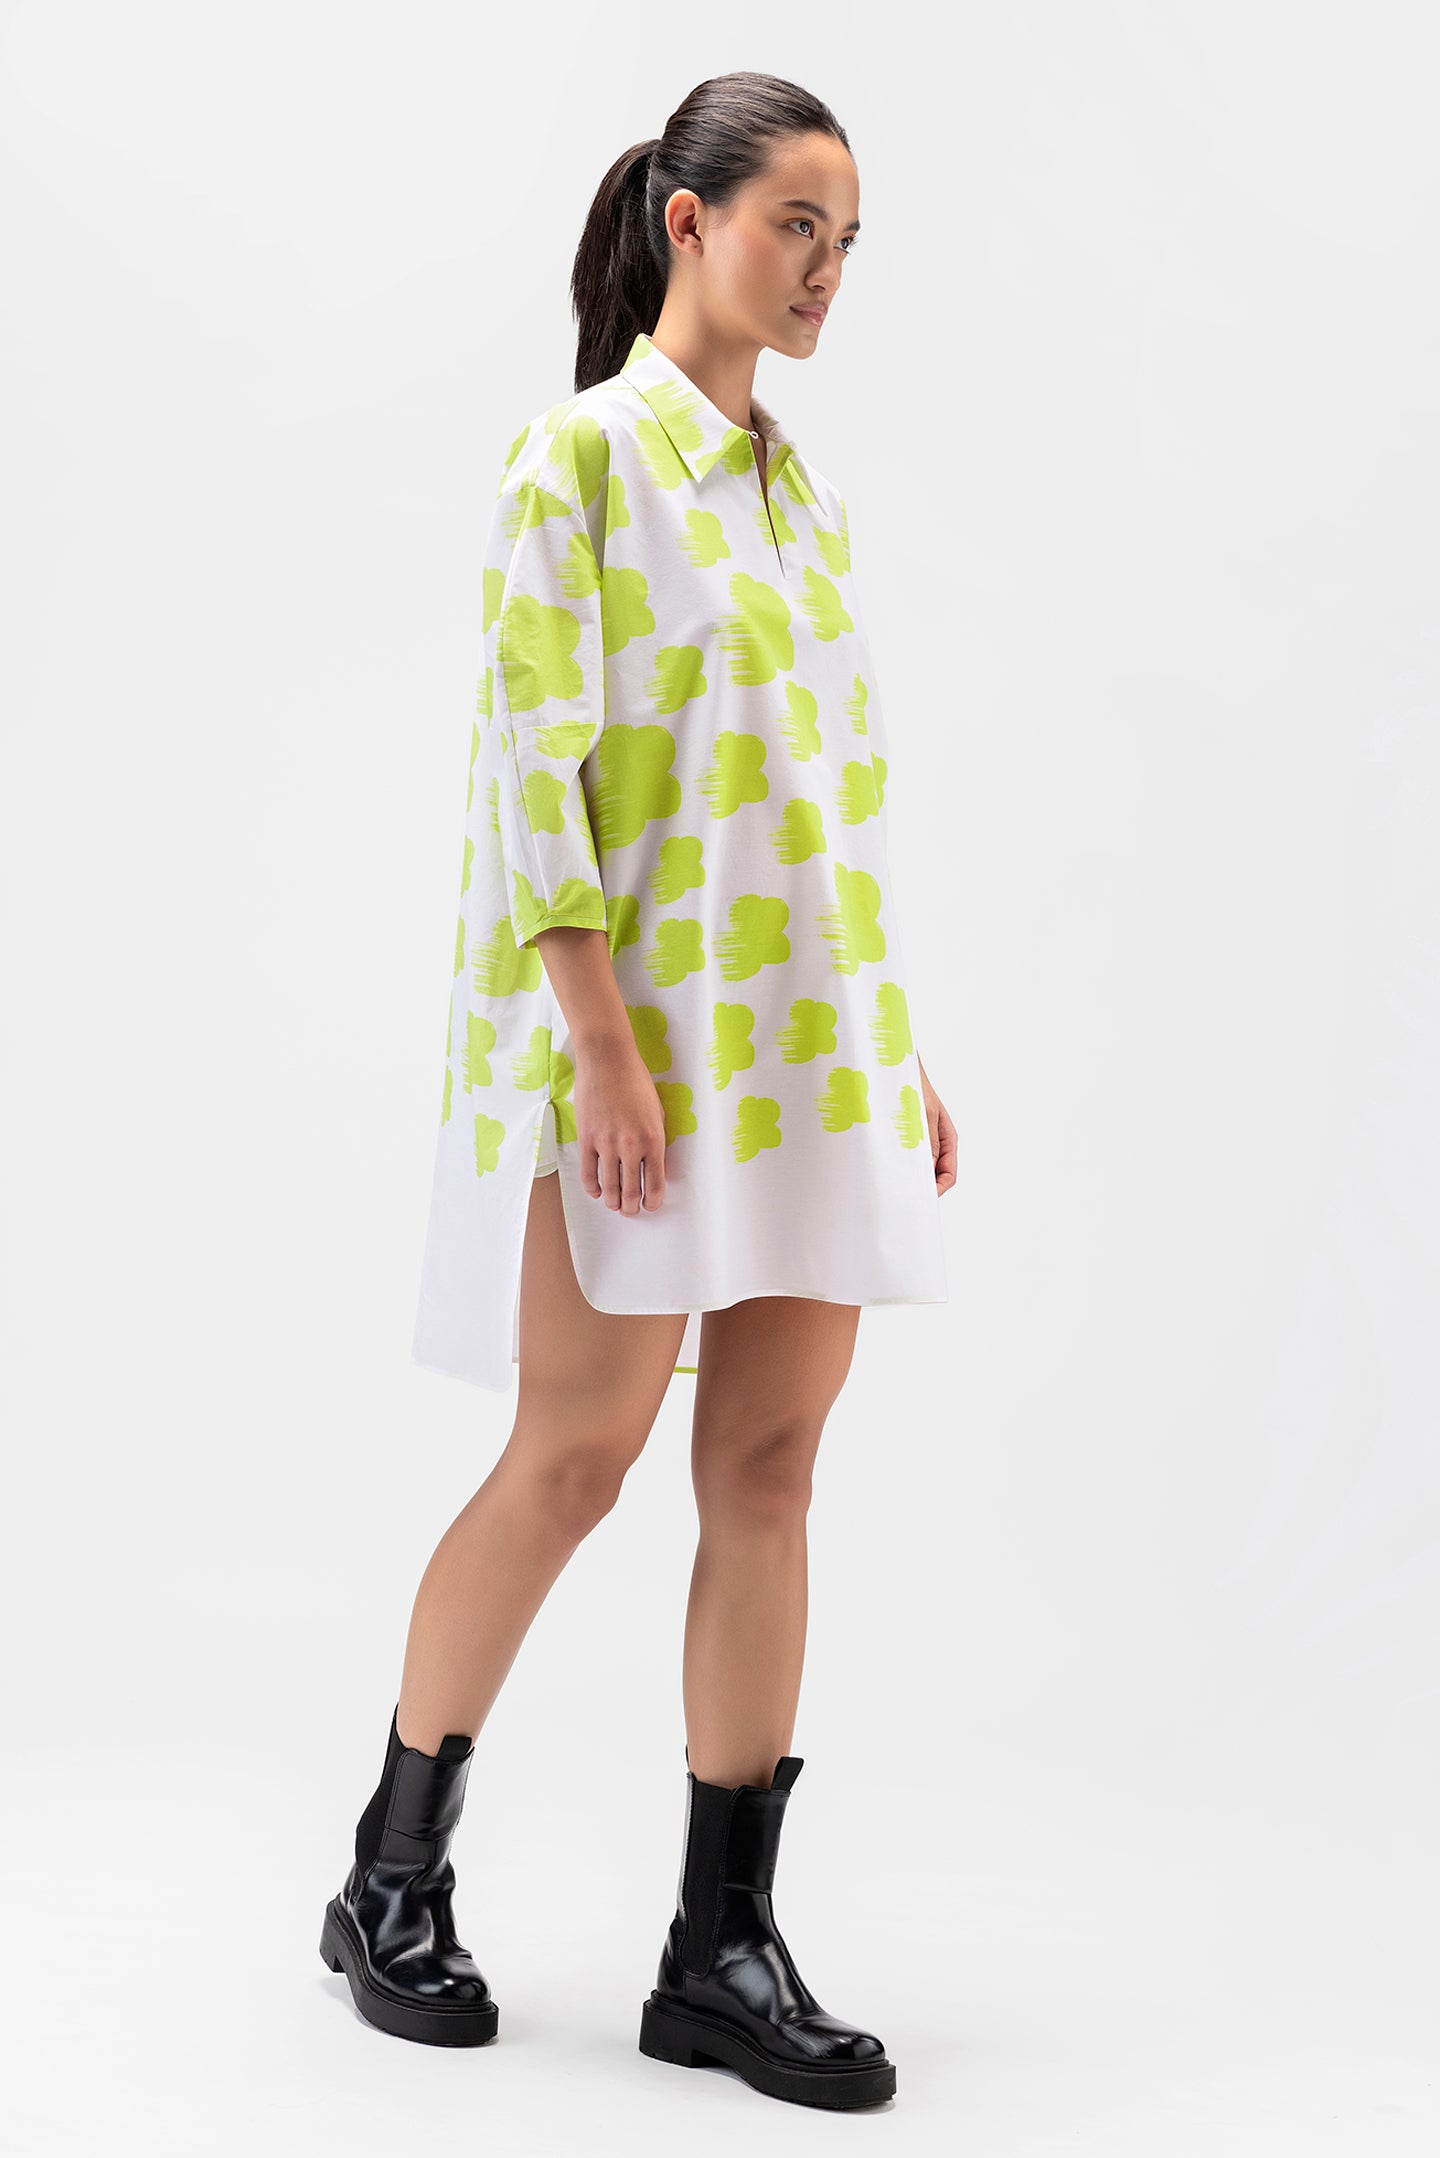 Abstract Florals Womens Tunic Shirt